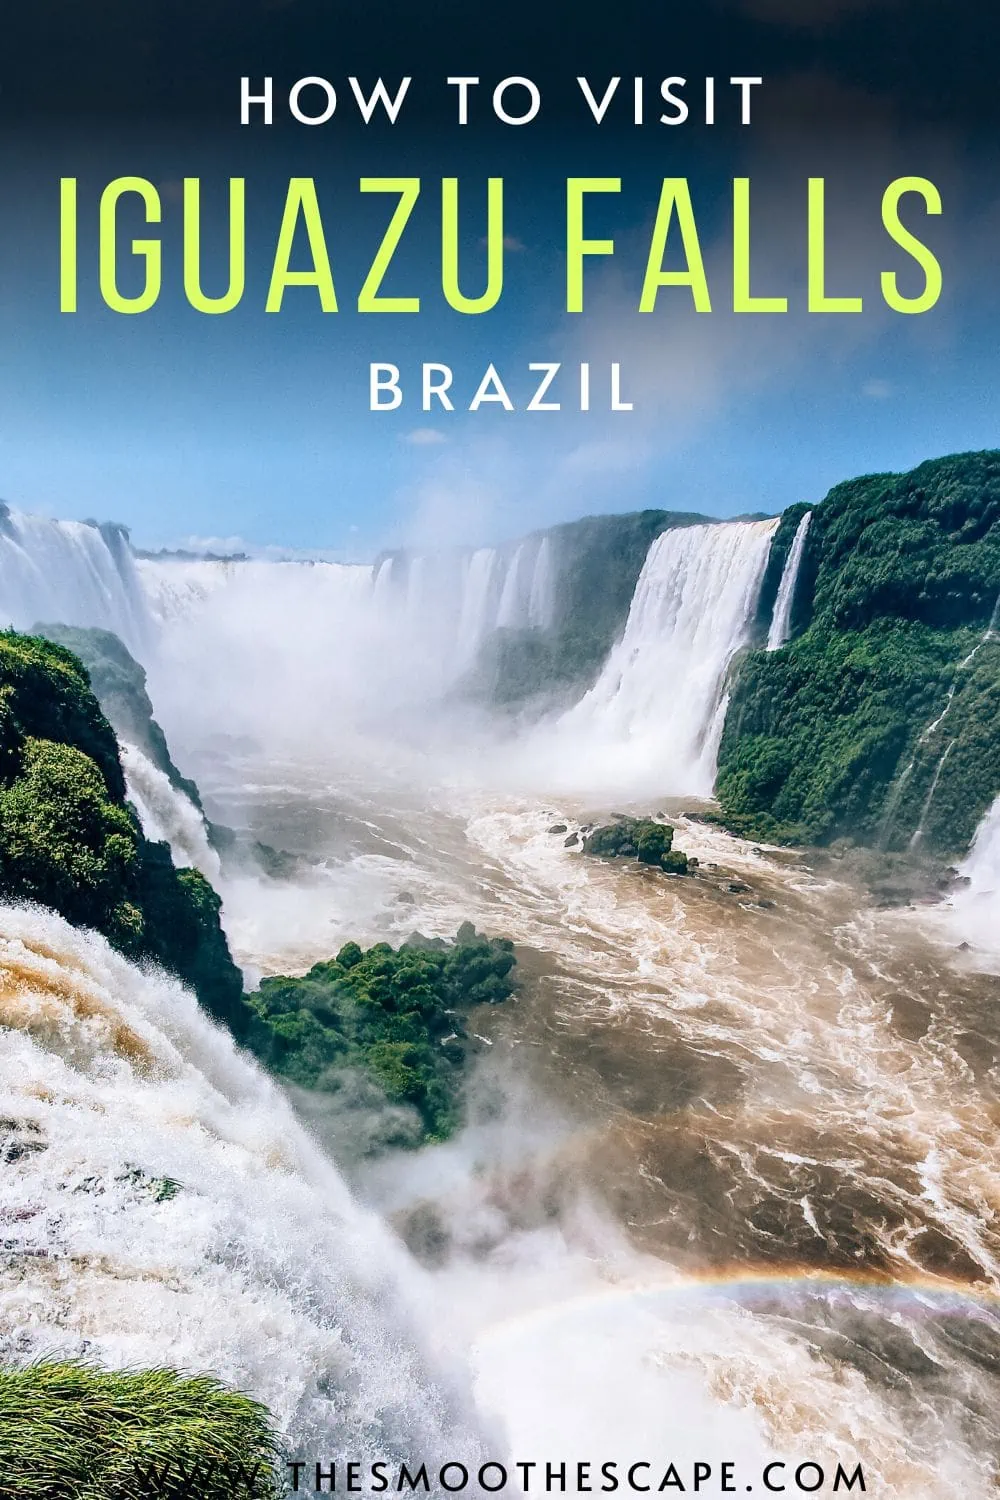 a Pinterest pin with an image of the waterfalls and a text overlay stating: How to visit Iguazu Falls, Brazil